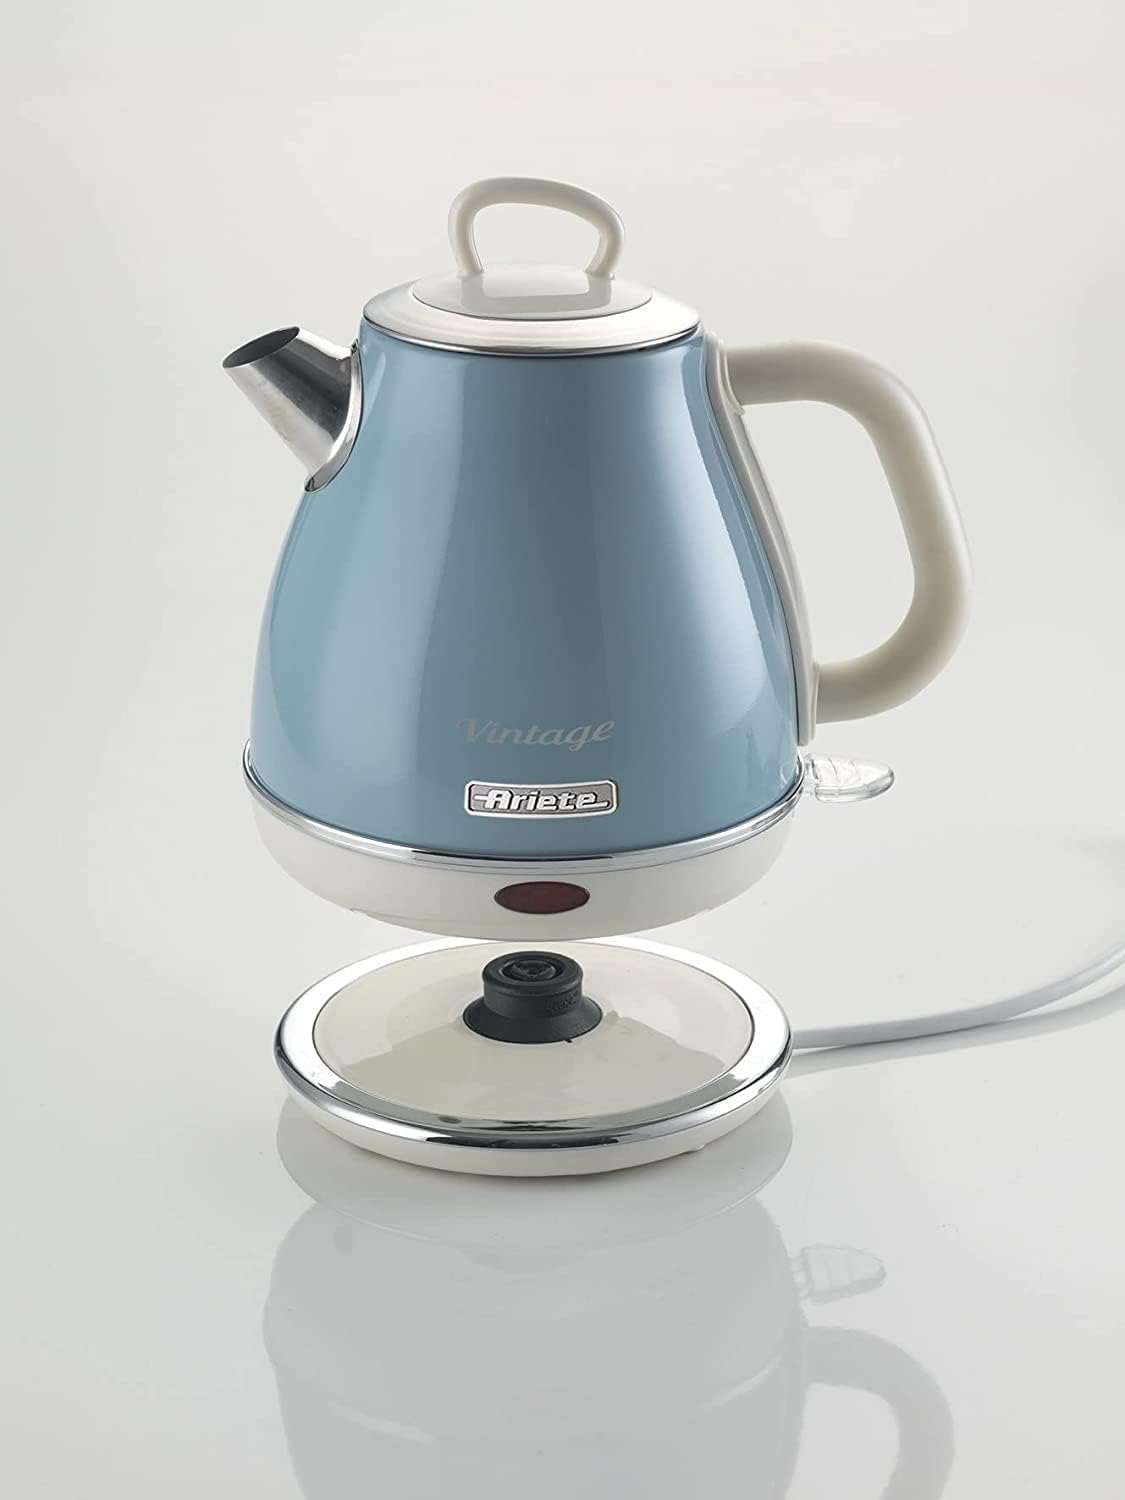 Ariete 2869 Vintage Electric Kettle Stainless Steel 1 Litre for Water, Tea and Herbal Teas with Automatic Shut-Off 2000W Light Blue